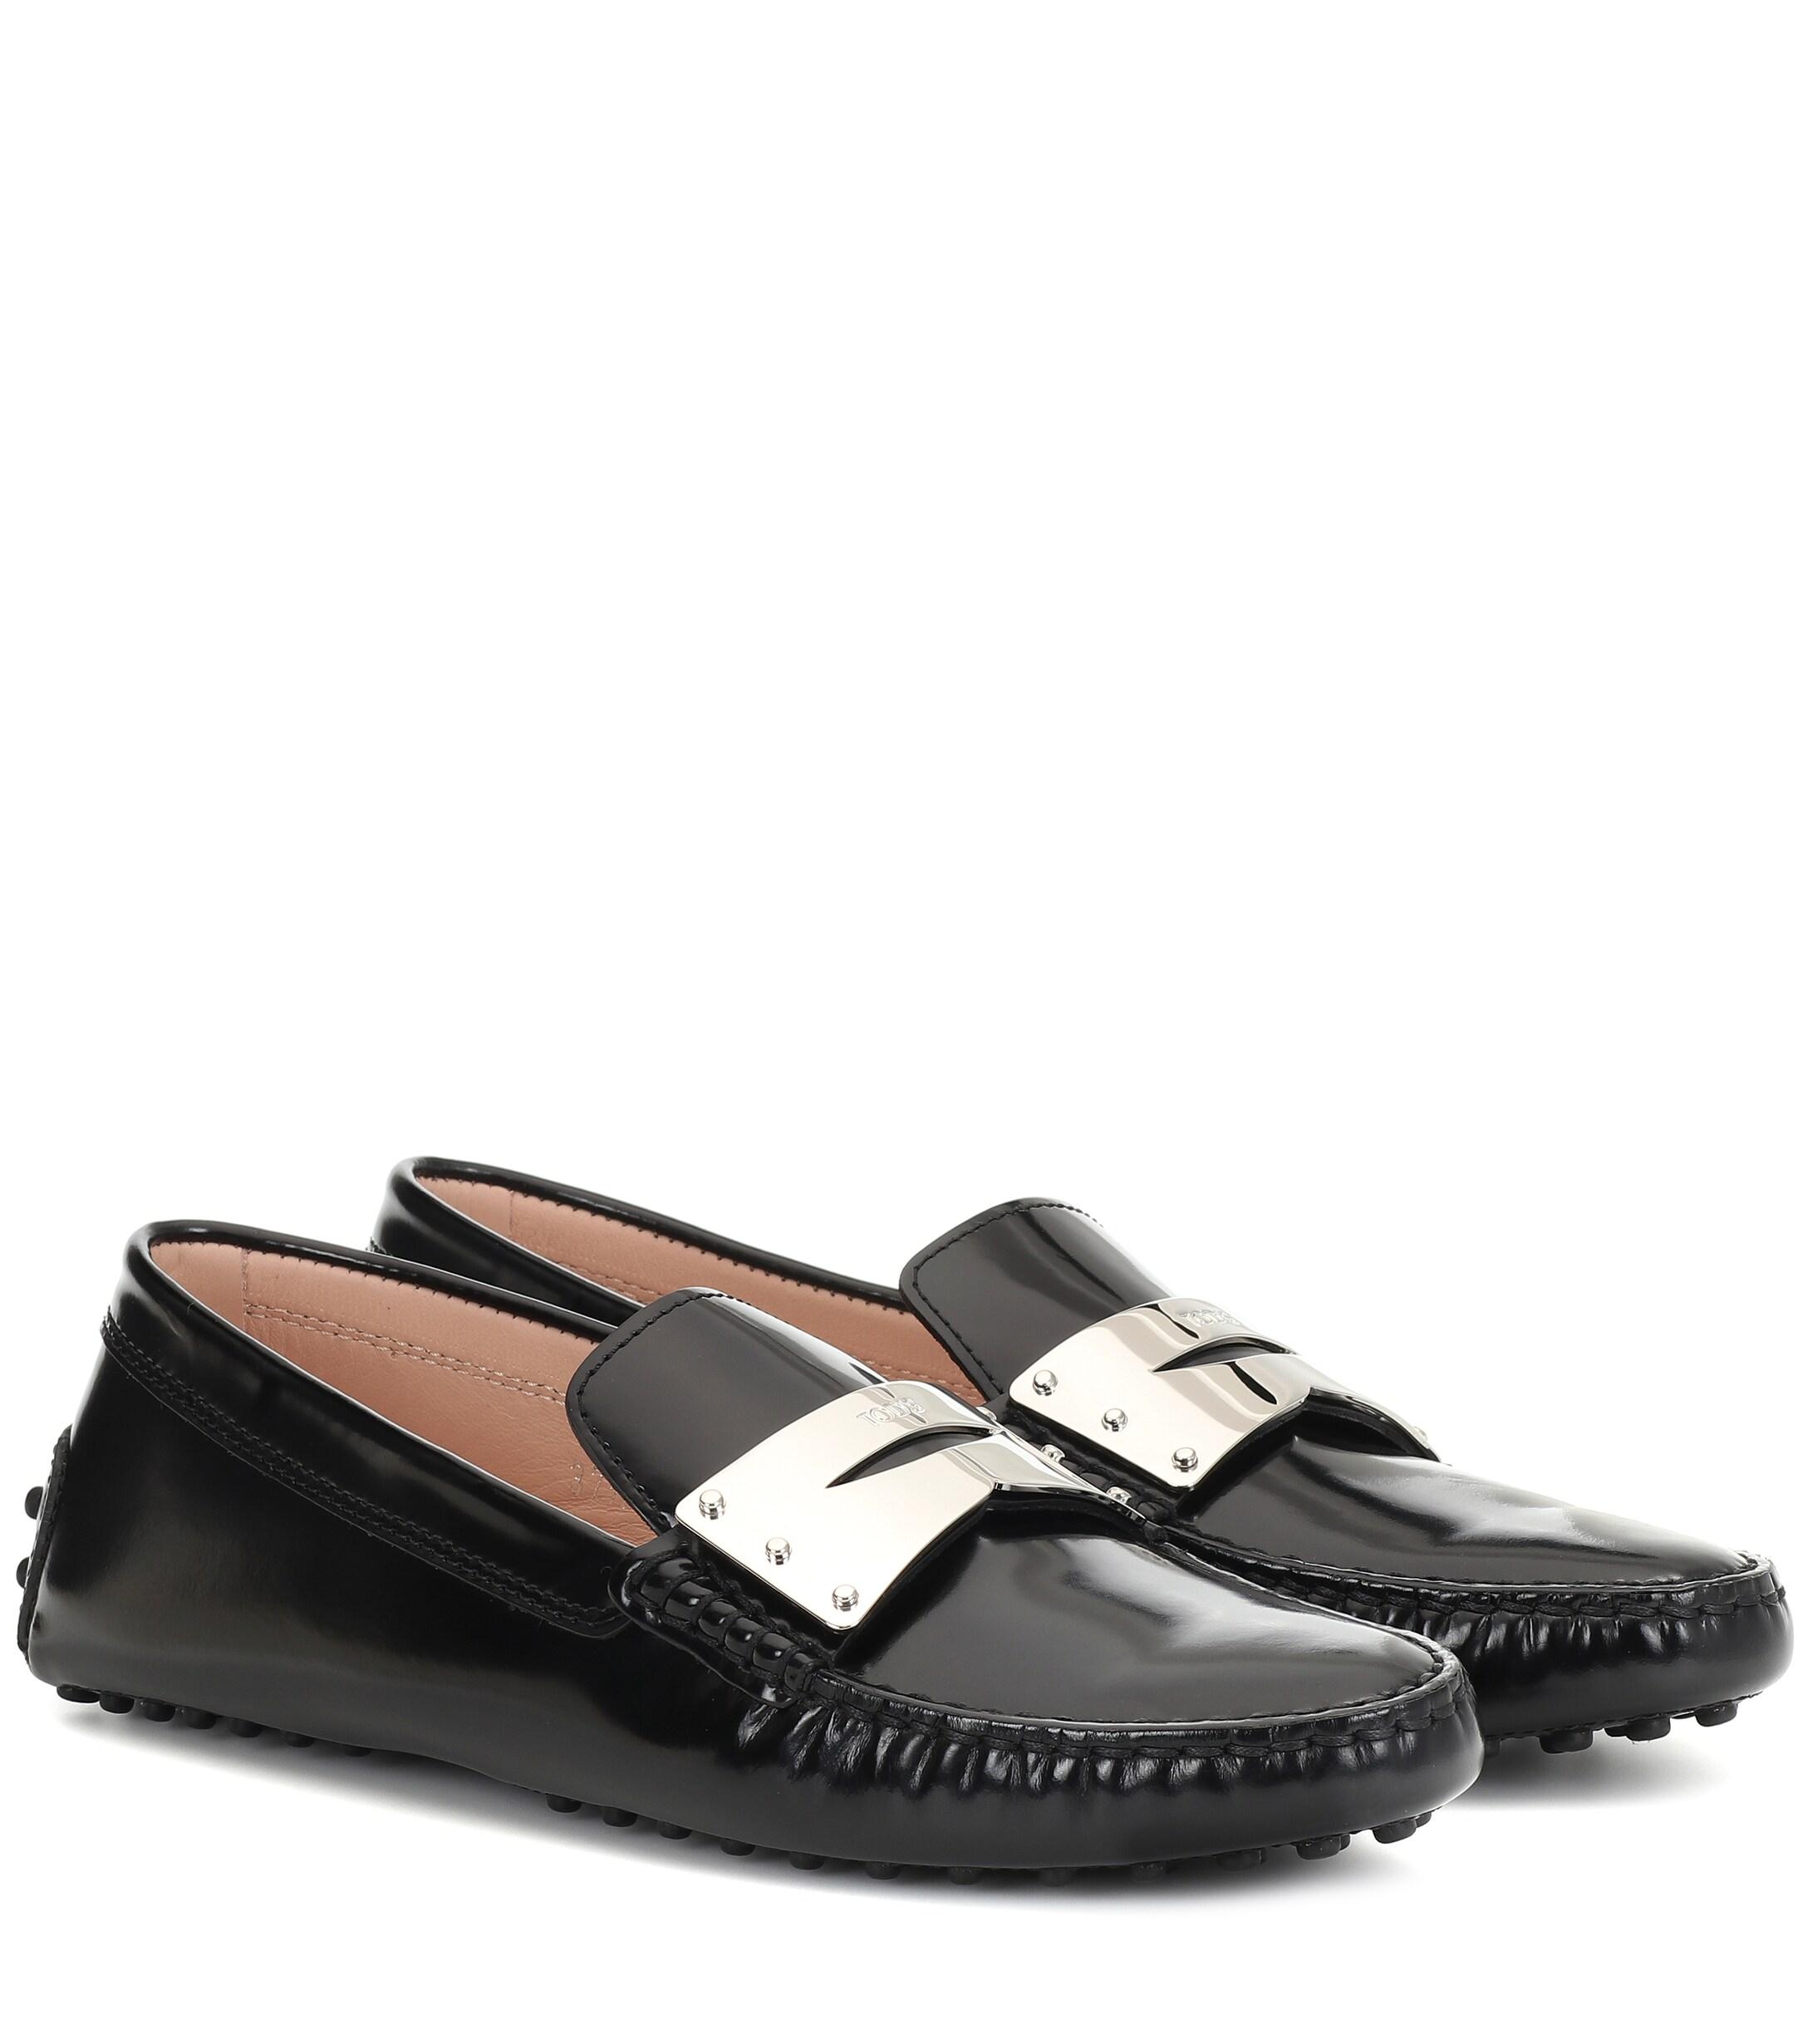 Tod's Gommino Patent Leather Moccasins in Black - Lyst